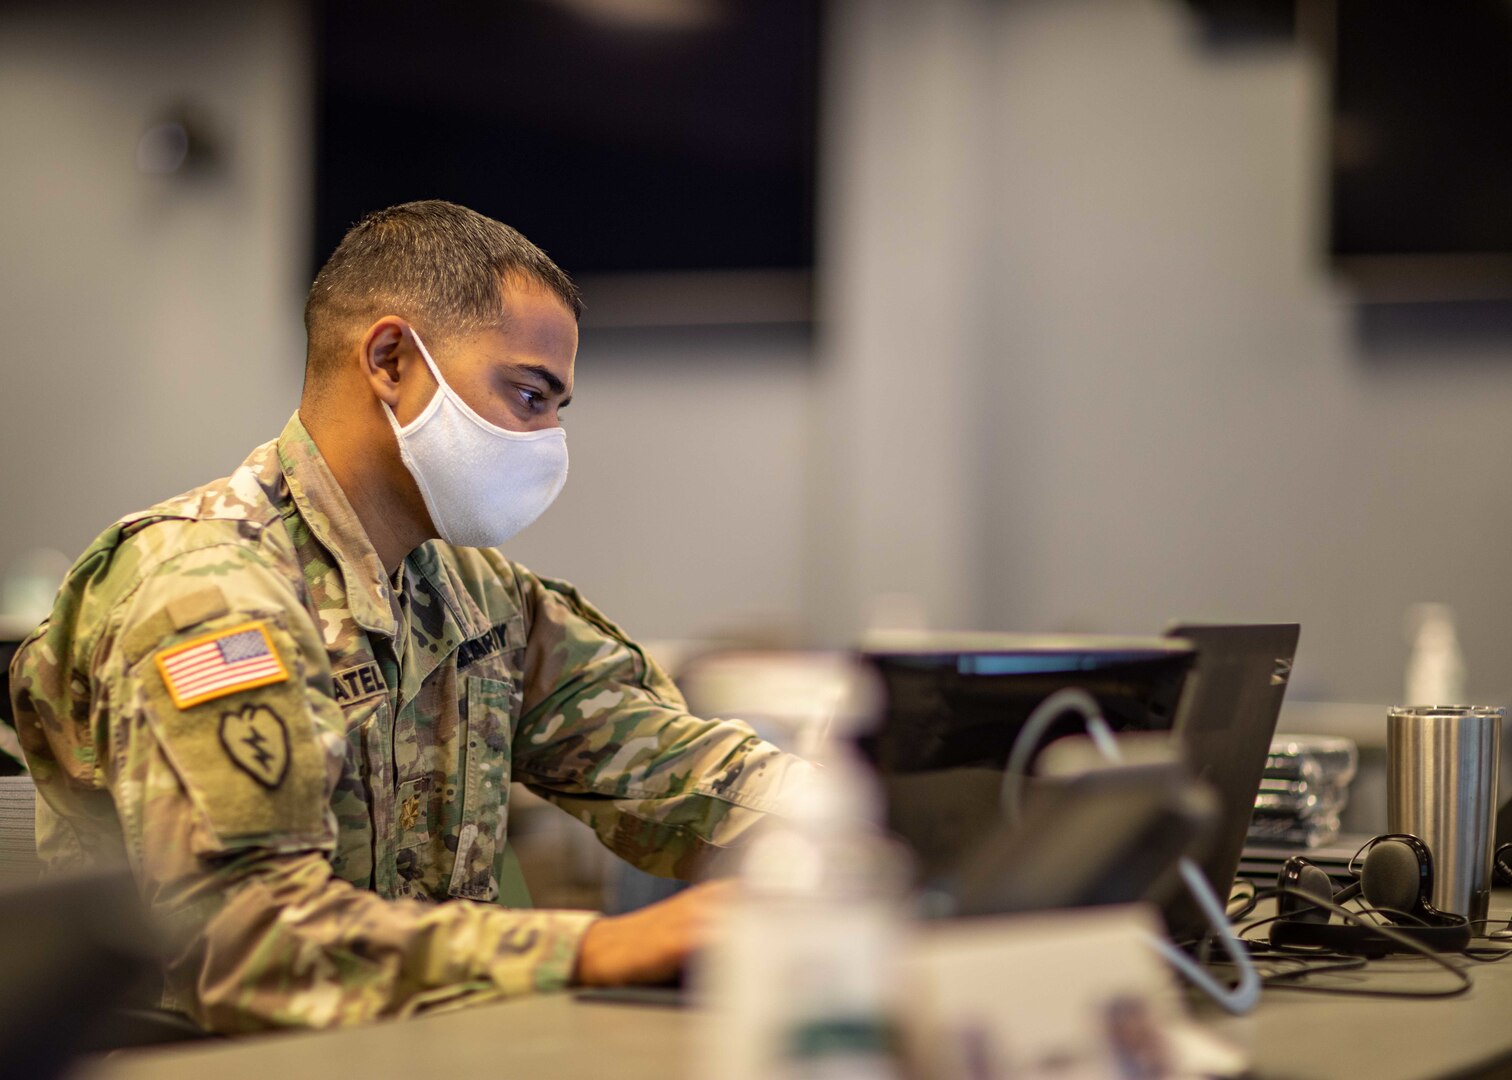 U.S. Army Maj. Ashish Patel, the chief of current operations assigned to Joint Task Force Civil Support (JTF-CS), manages operations in the joint operation center at JTF-CS headquarters in support of Exercise KODA, Oct. 15, 2020.